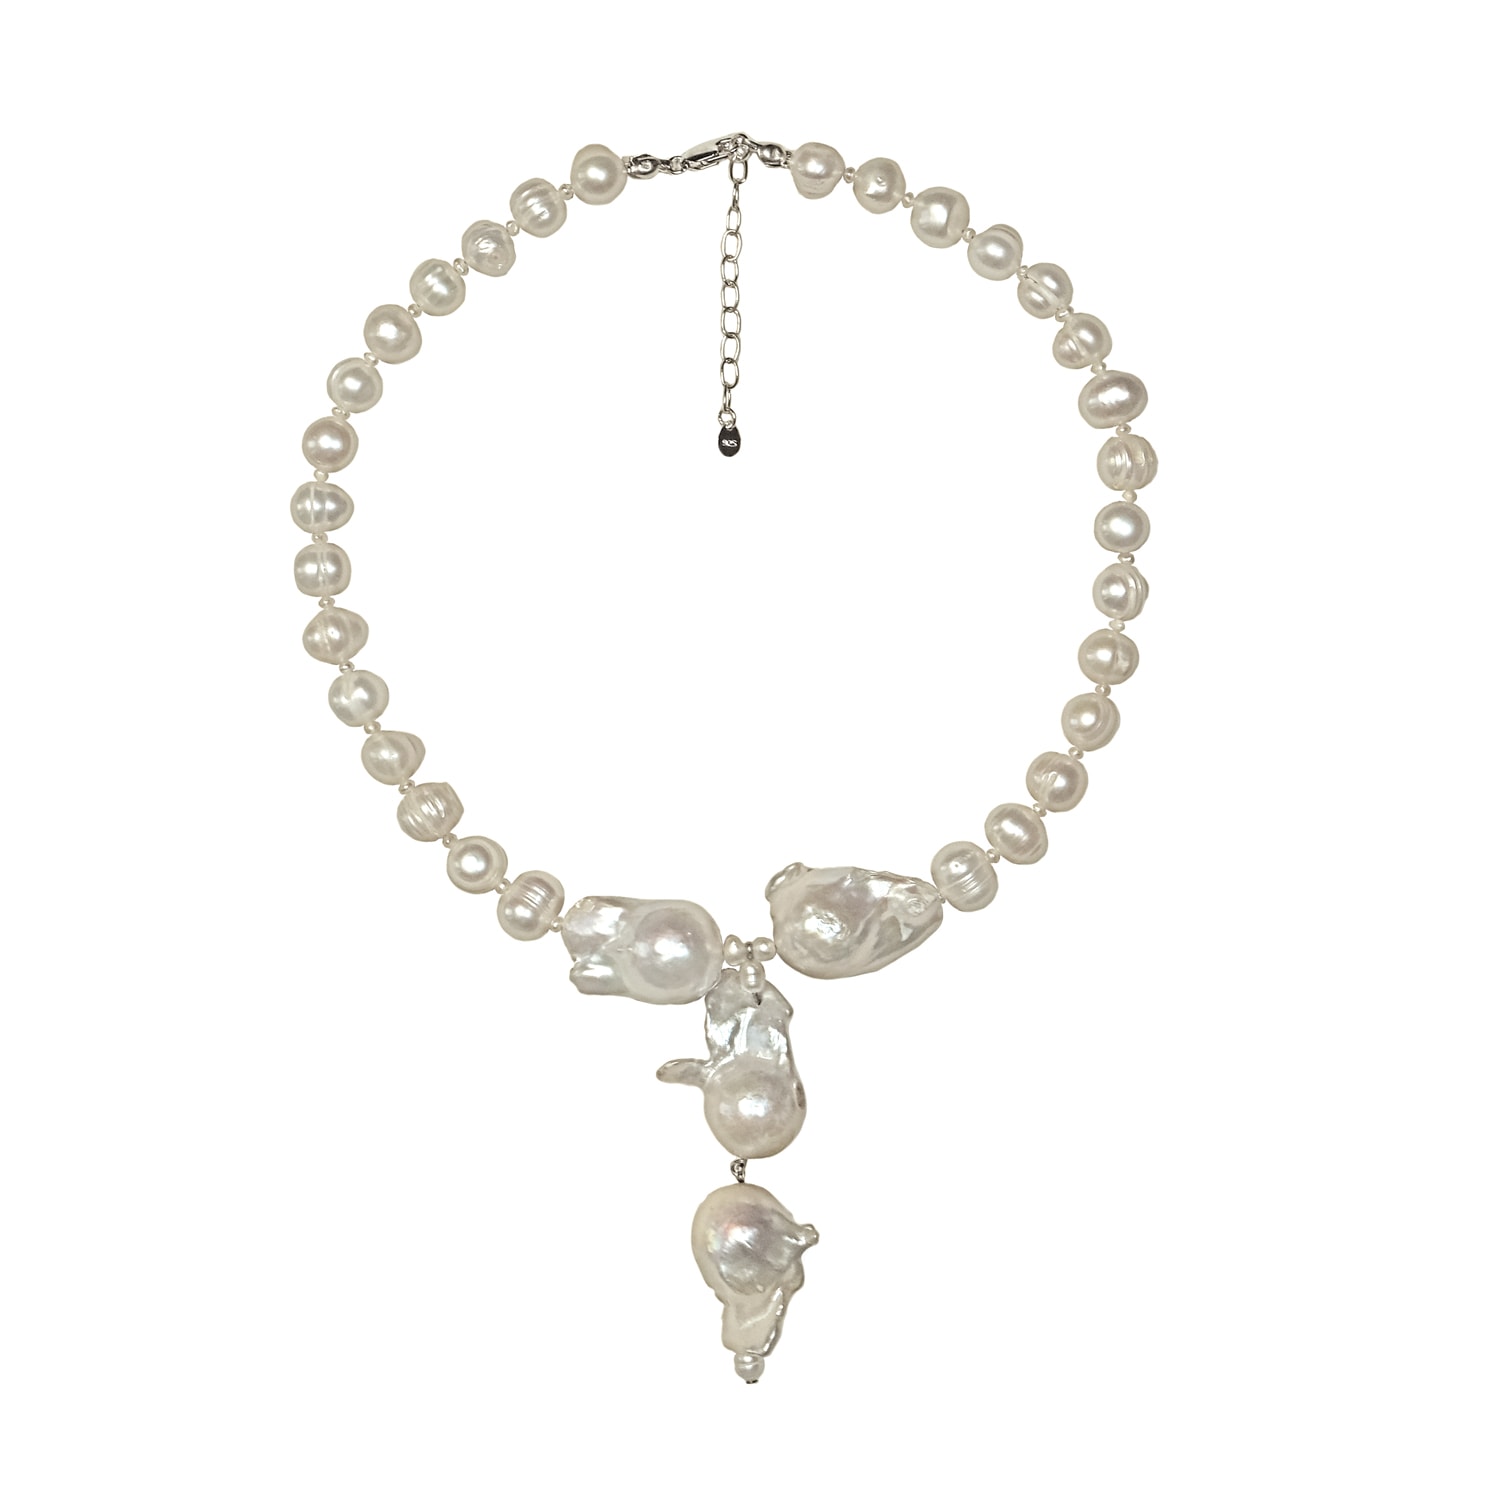 Women’s Silver / White / Neutrals Incisor Freshwater Pearl Necklace Rka